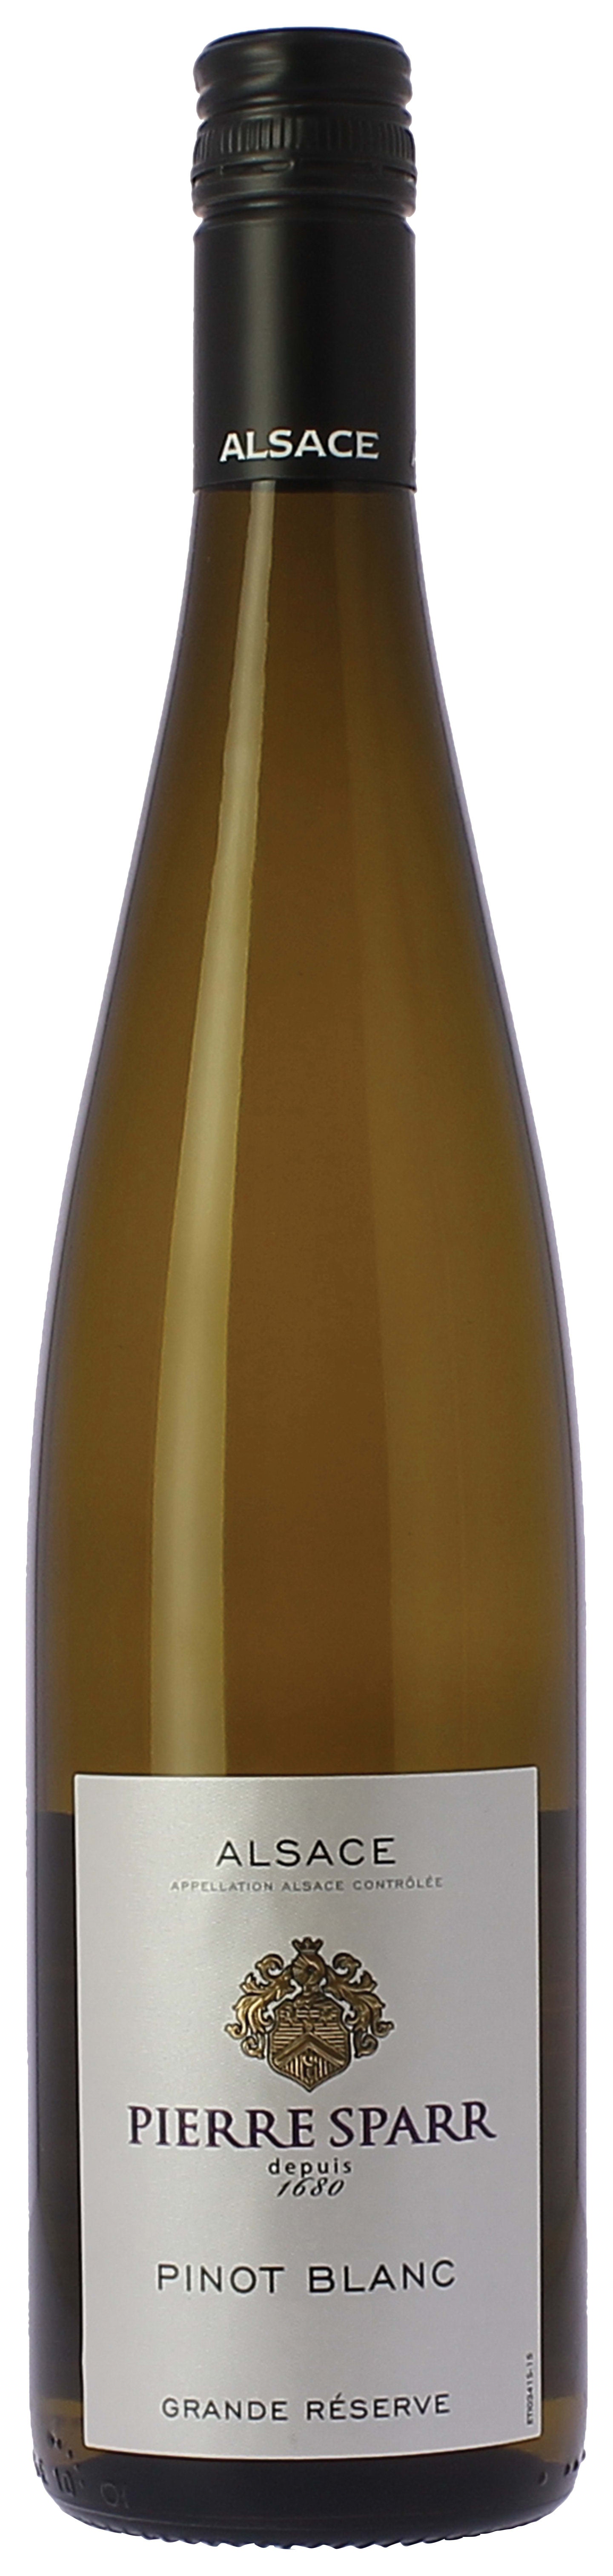 Pierre Sparr 19 Pinot Blanc